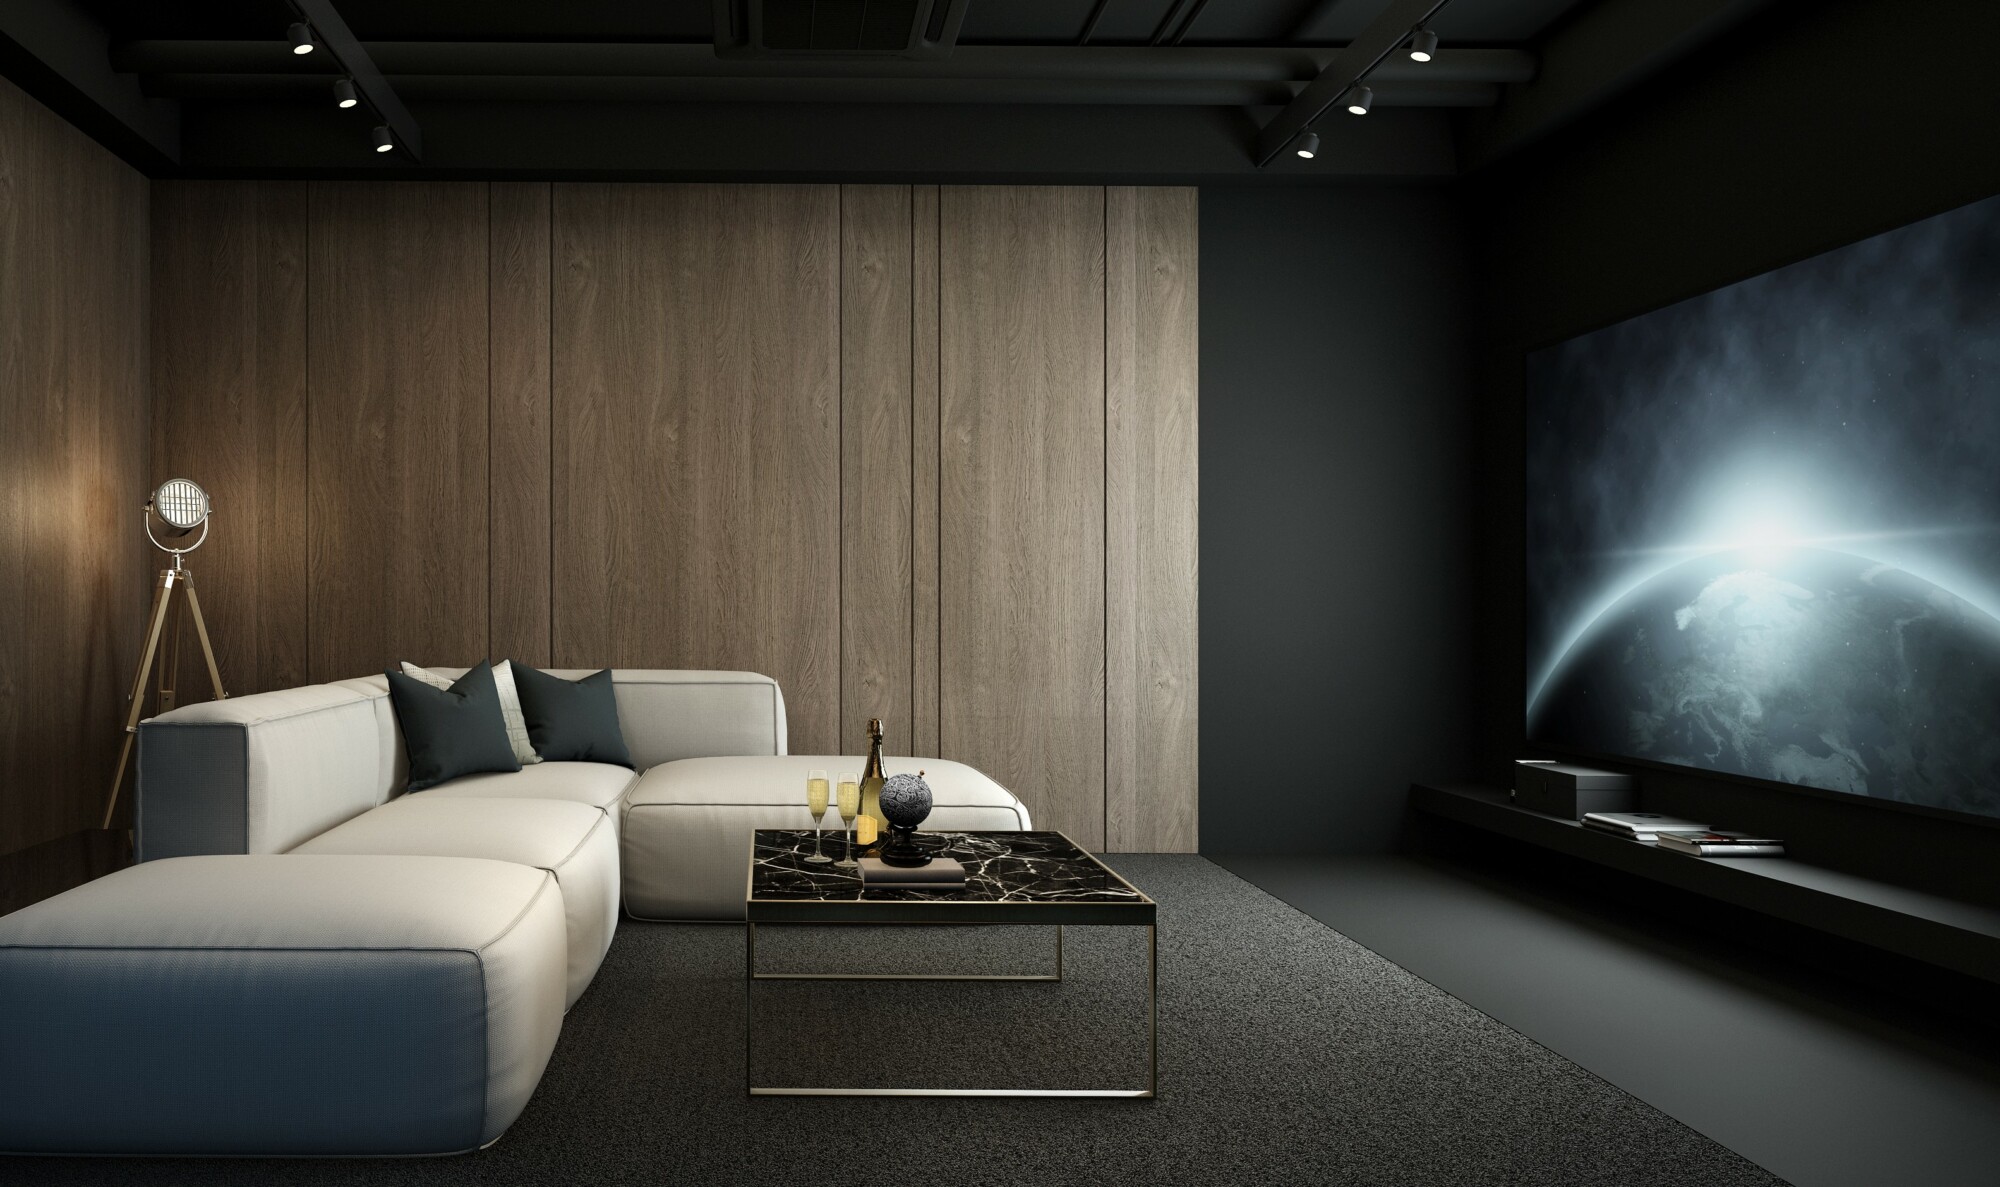 A home cinema with a beige sofa to the left hand side facing the right wall with a large projector image on it that is dark